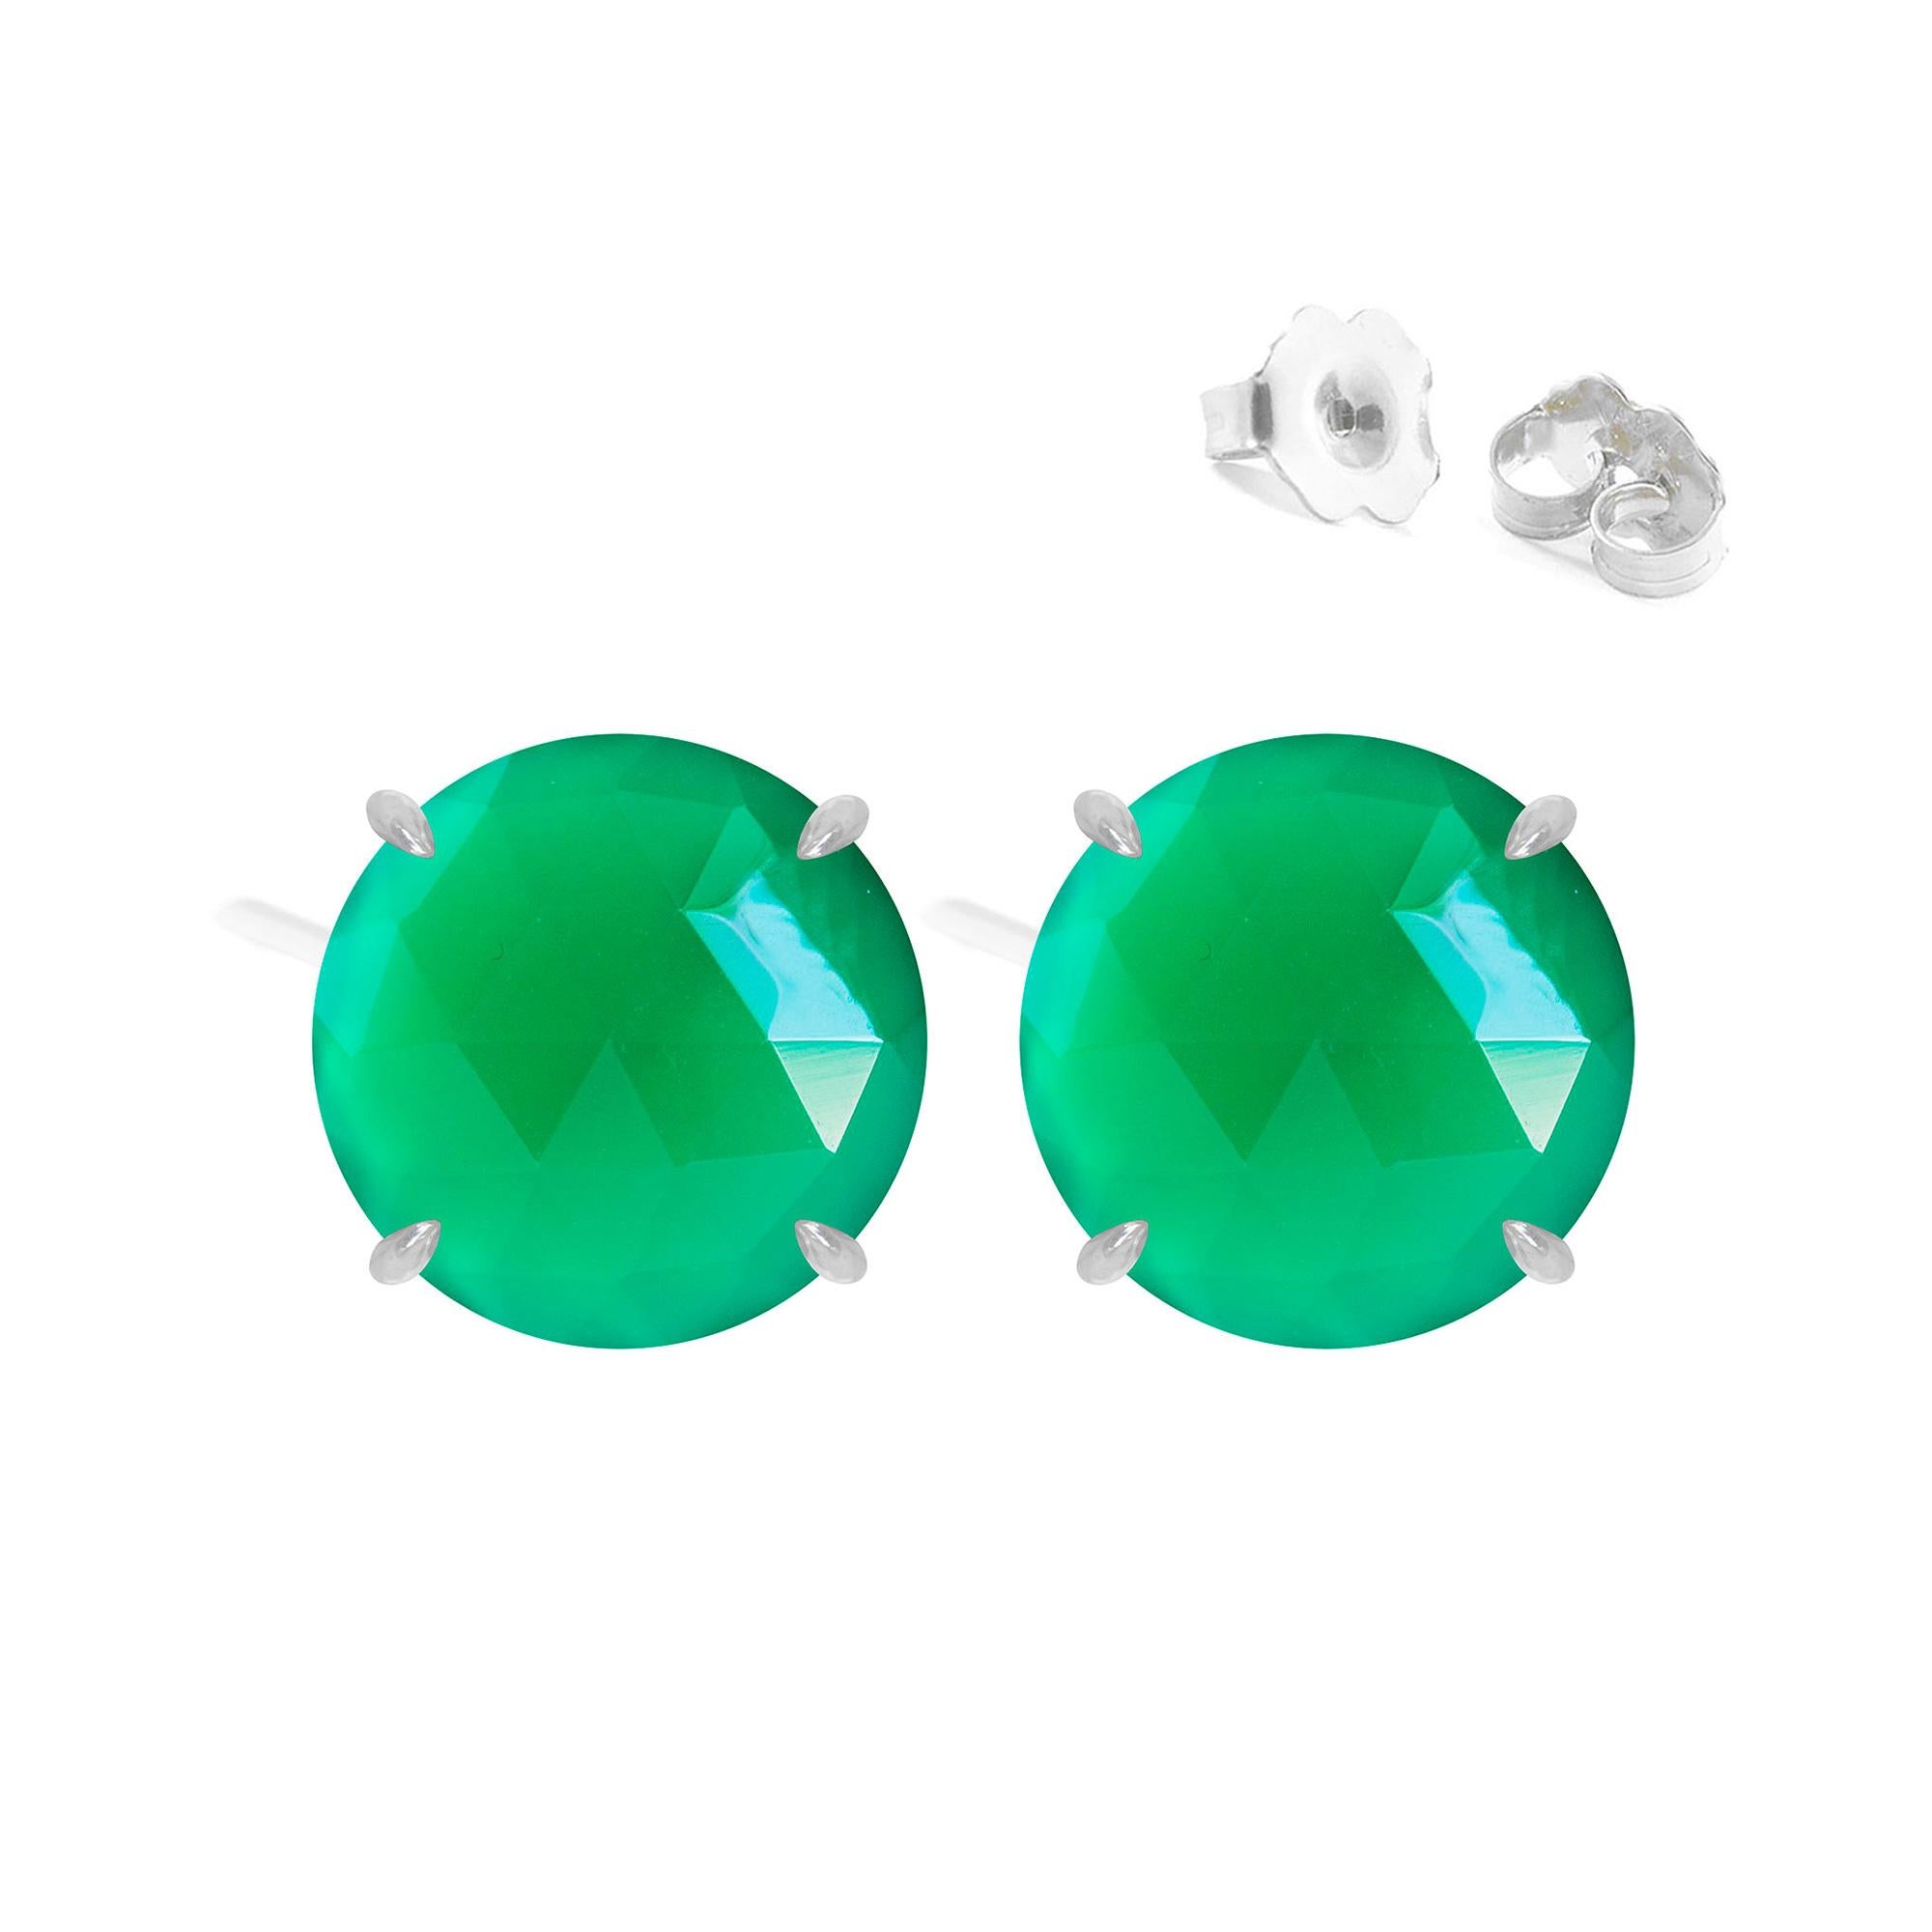 Made with green onyx, these sweet, simple prong-set Petal Silver Studs are a natural complement to your personal style.
Nina Nguyen Design's patent-pending earrings have an element on the back of the stud or charm to allow these pieces to